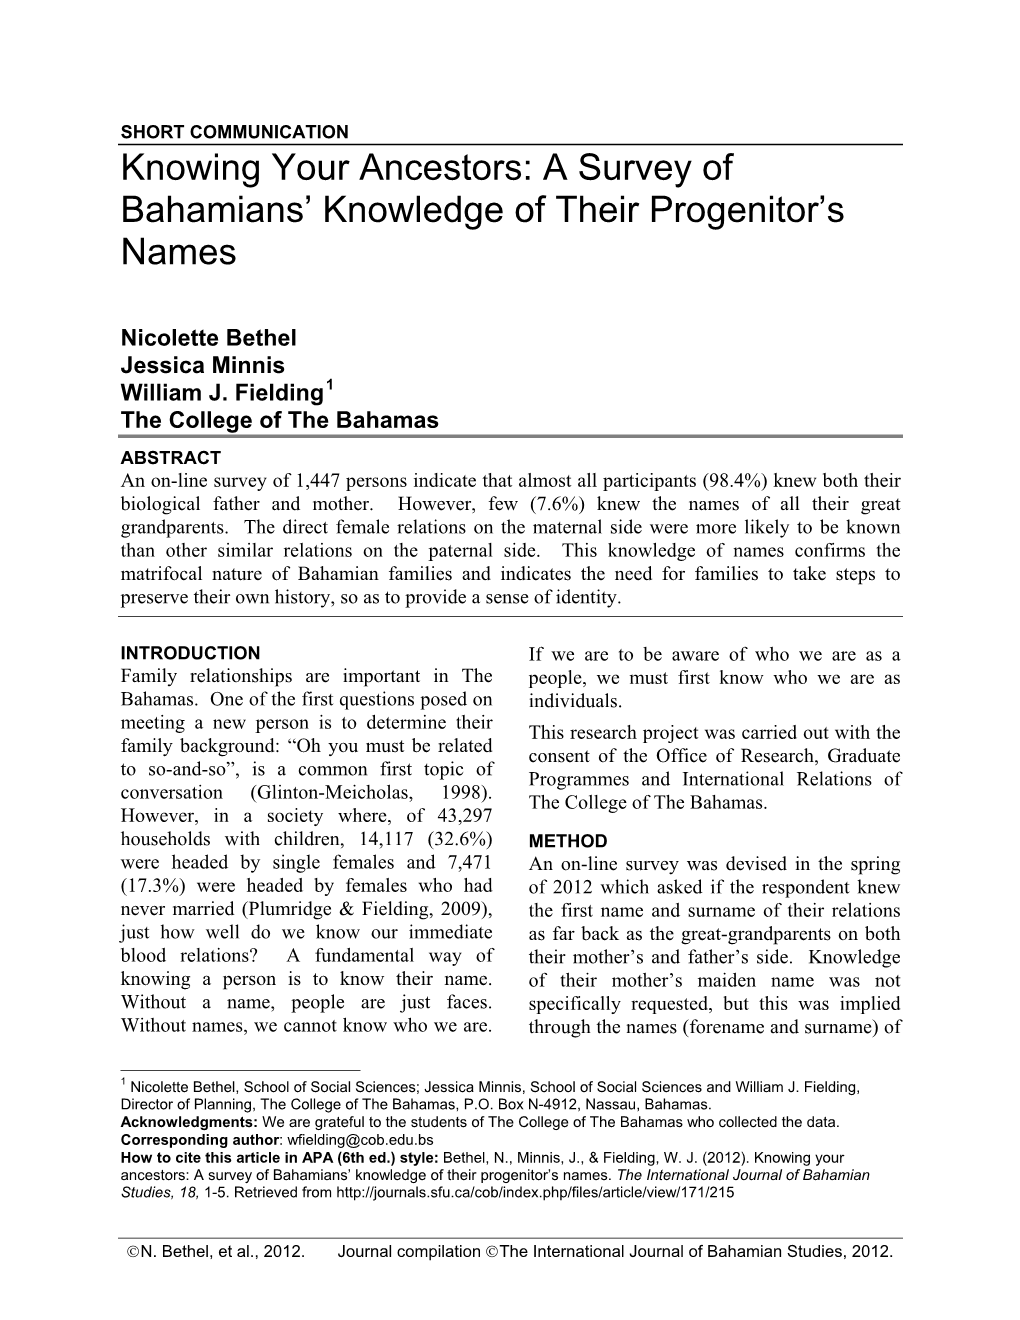 Knowing Your Ancestors: a Survey of Bahamians’ Knowledge of Their Progenitor’S Names